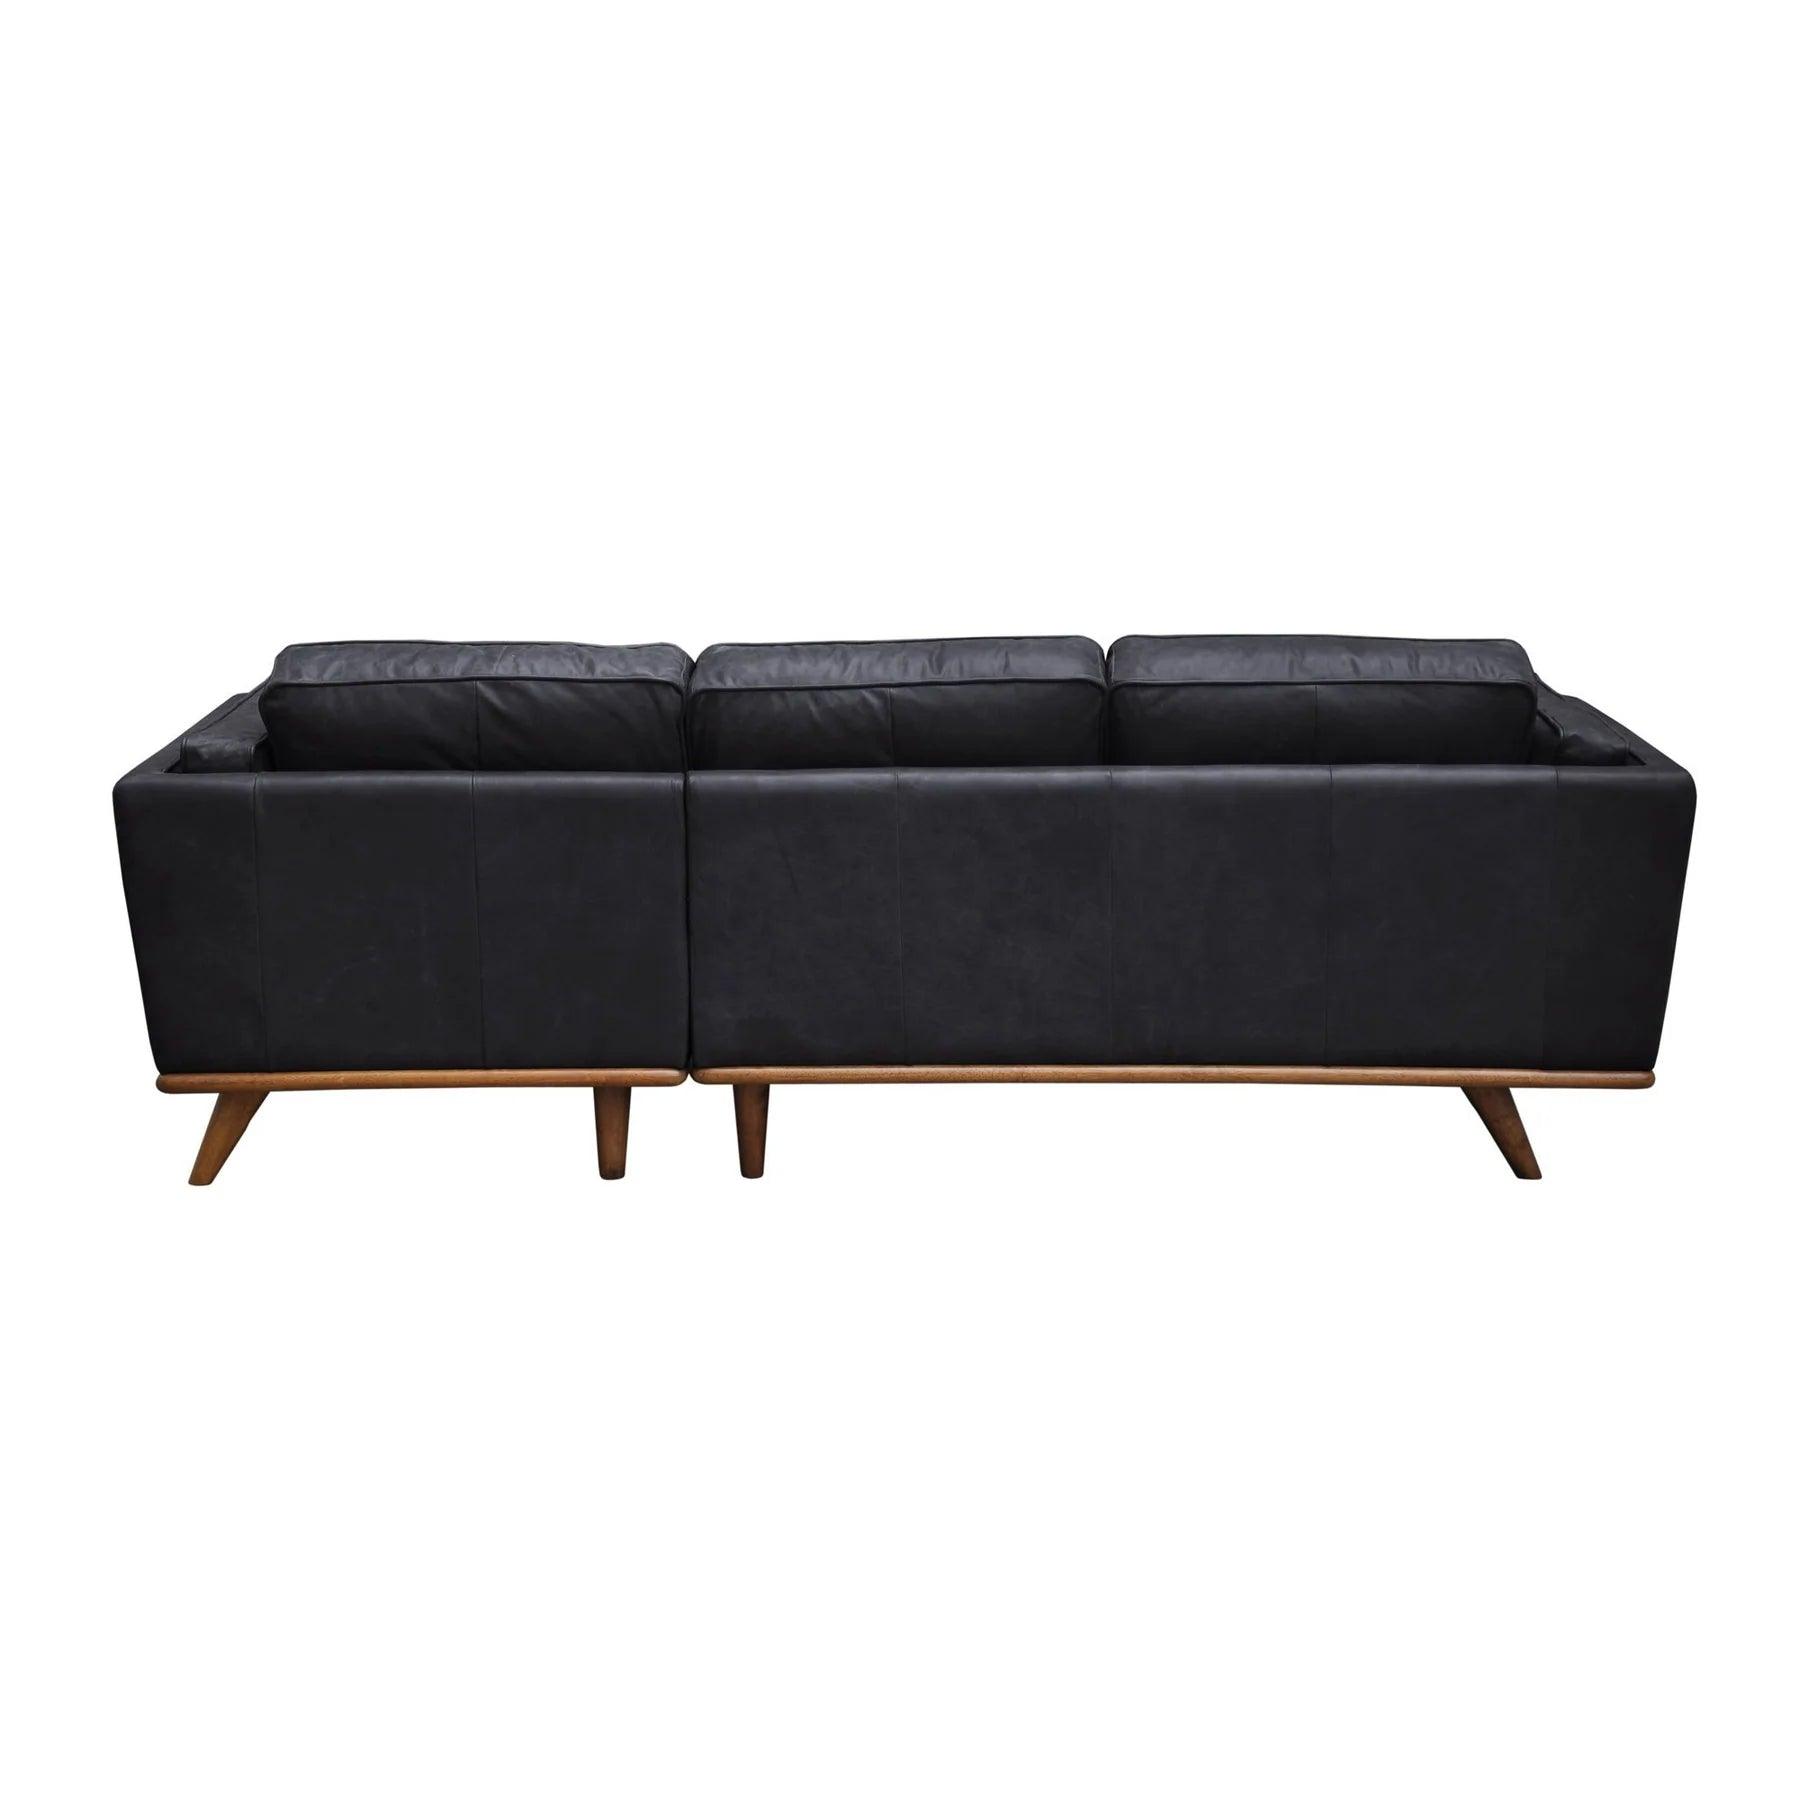 LAS VEGAS ARIA Italian Leather Right Sectional - Charme Black Leather - Northern Interiors